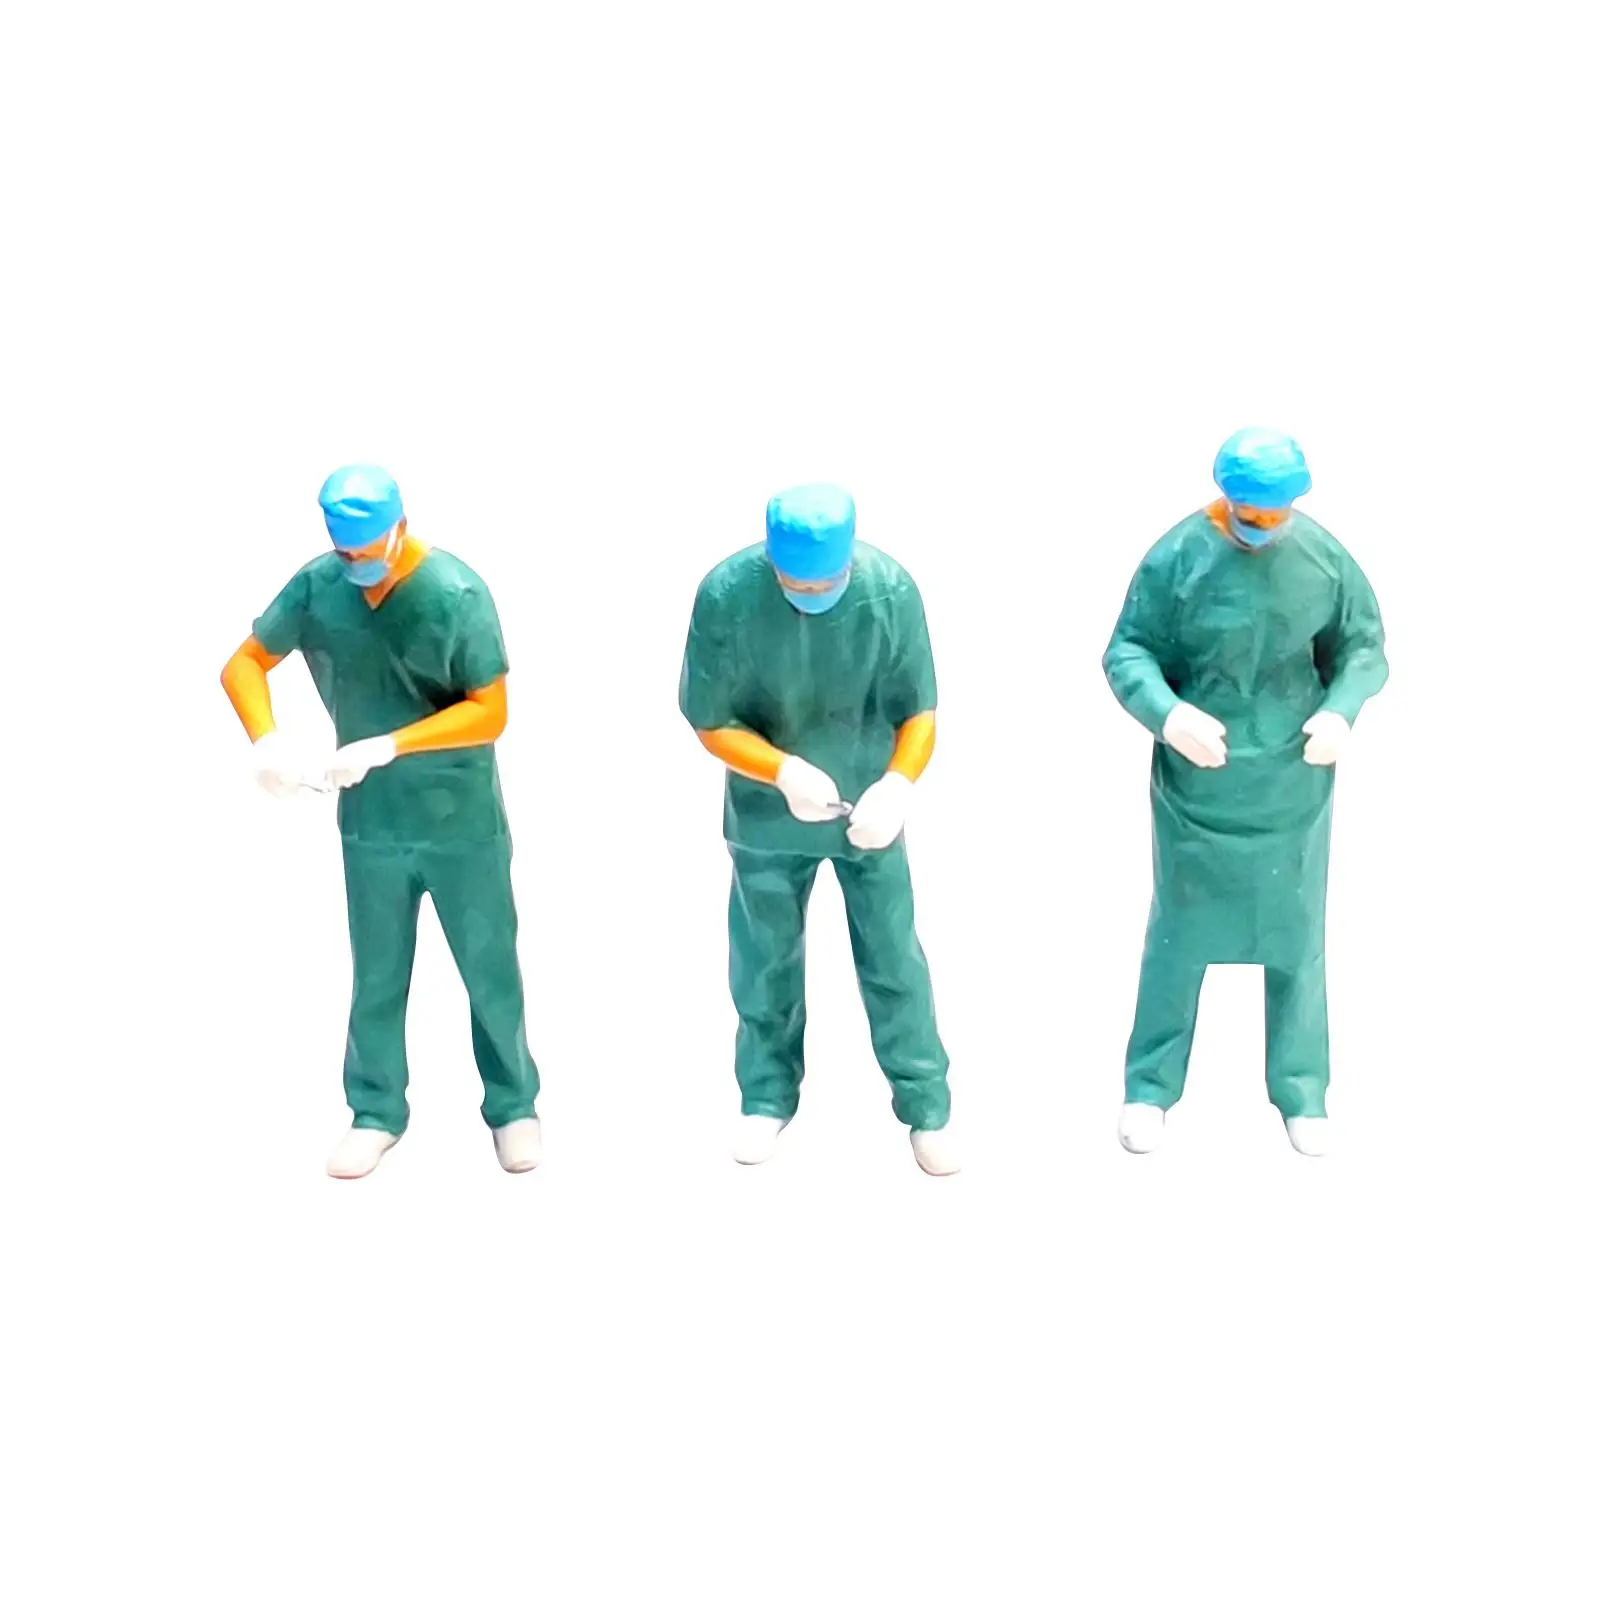 Miniature 1:64 Figures Model Realistic Accessories ,Resin Hand Painted Surgeon Figurine for DIY Projects Layout